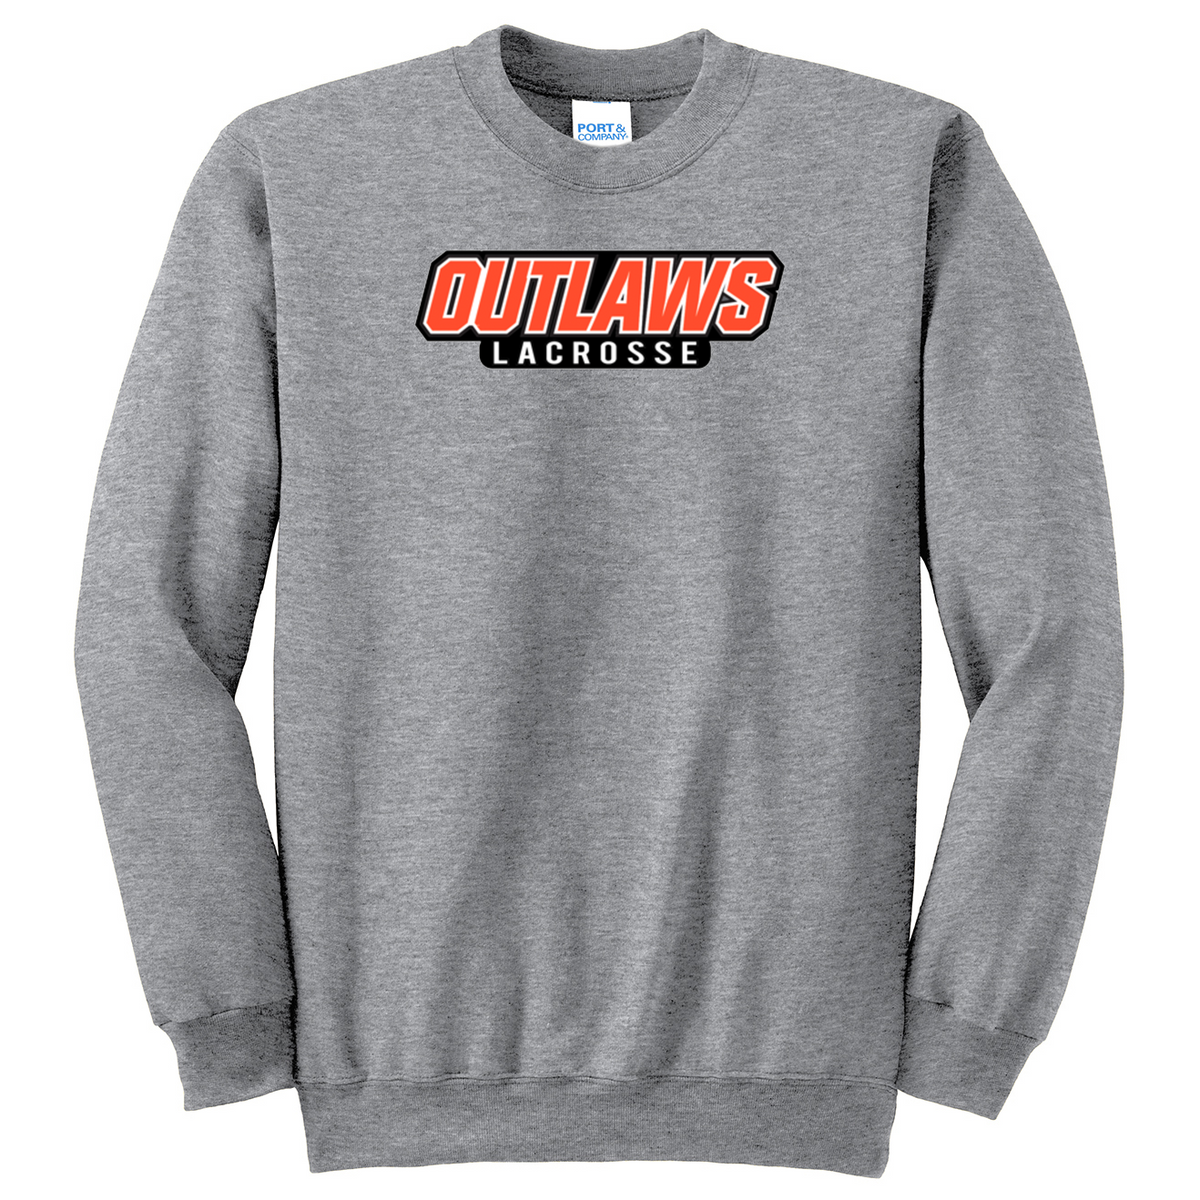 Outlaws Lacrosse Crew Neck Sweater